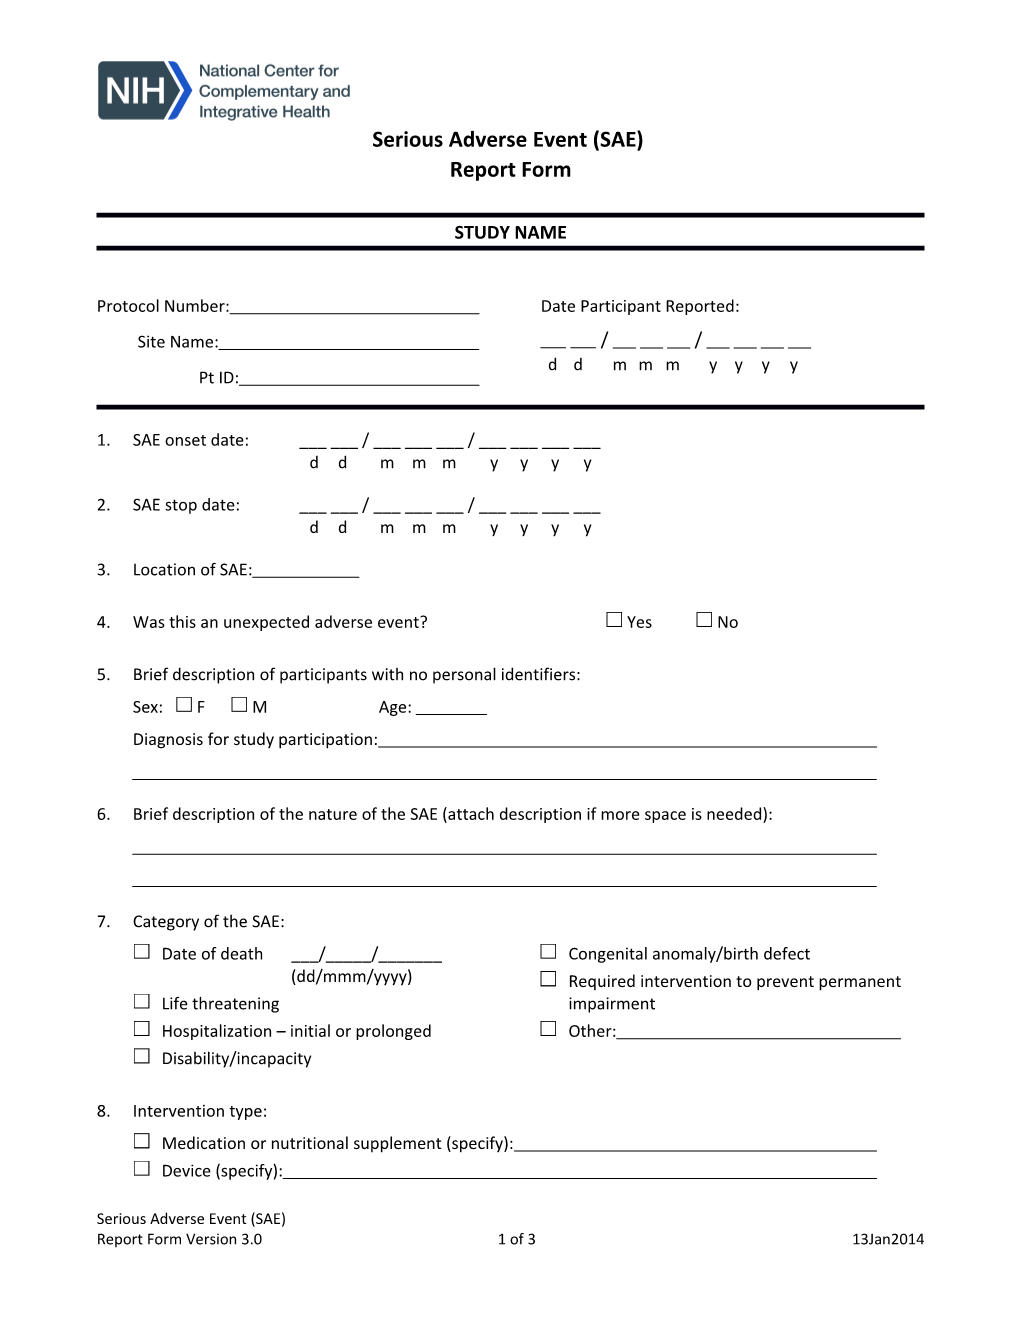 Serious Adverse Event (SAE) Report Form